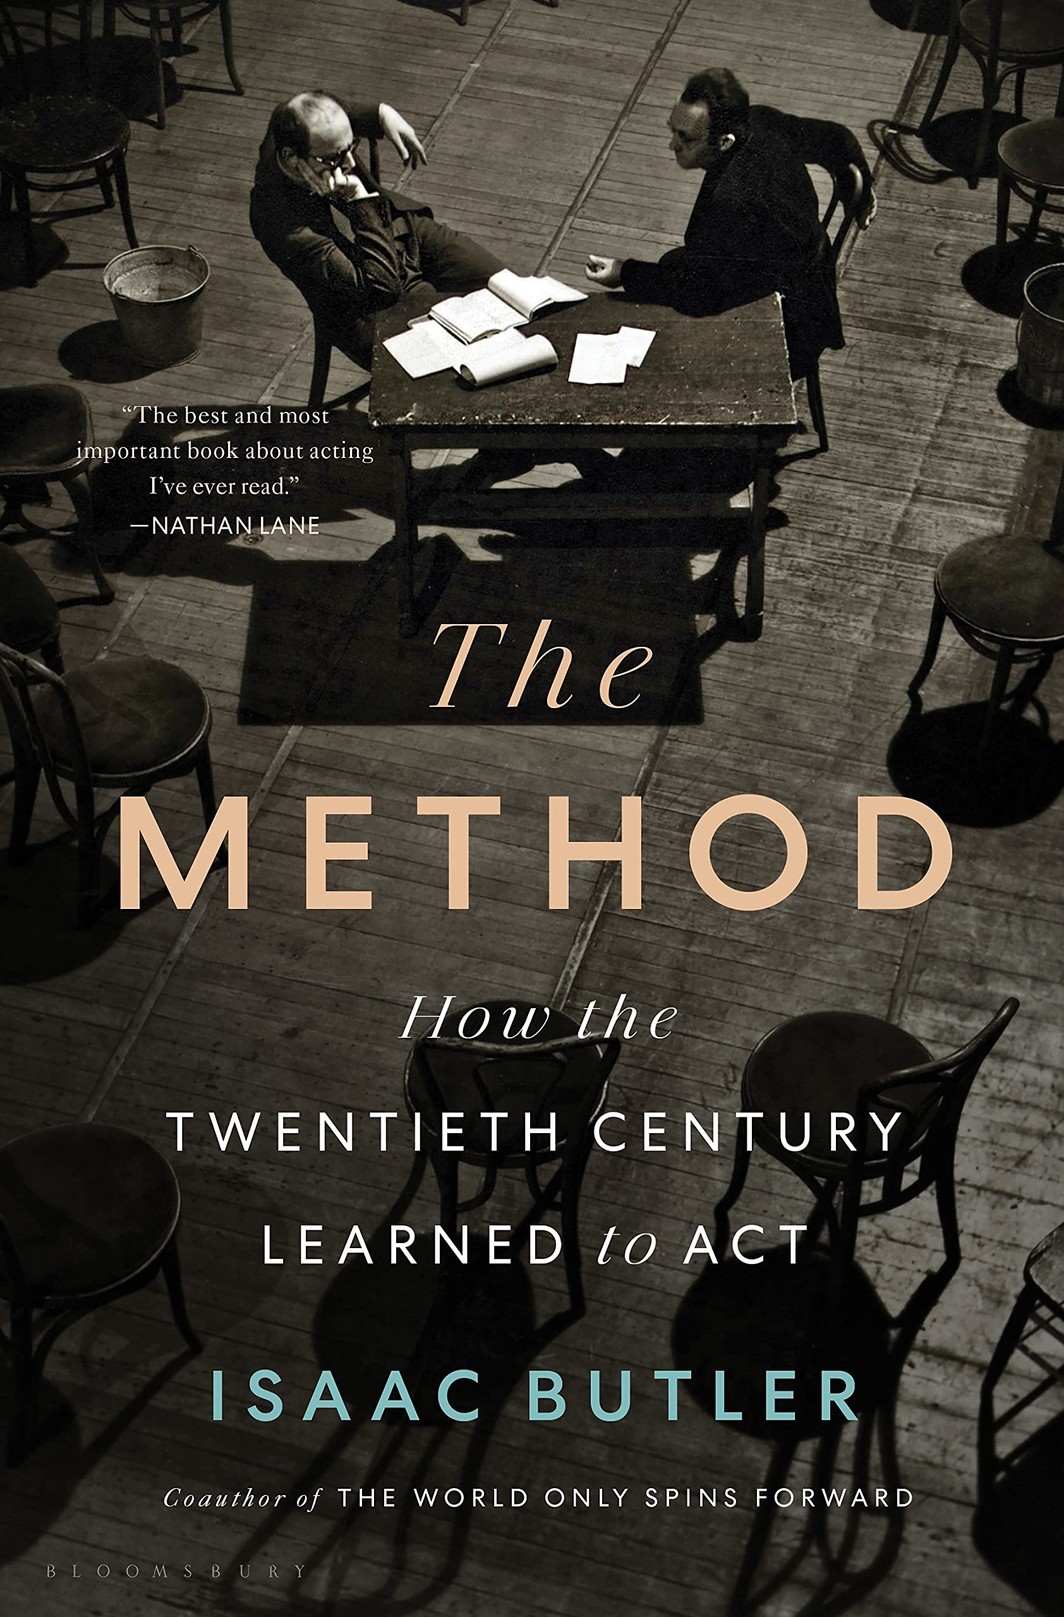 The cover of The Method: How the Twentieth Century Learned to Act